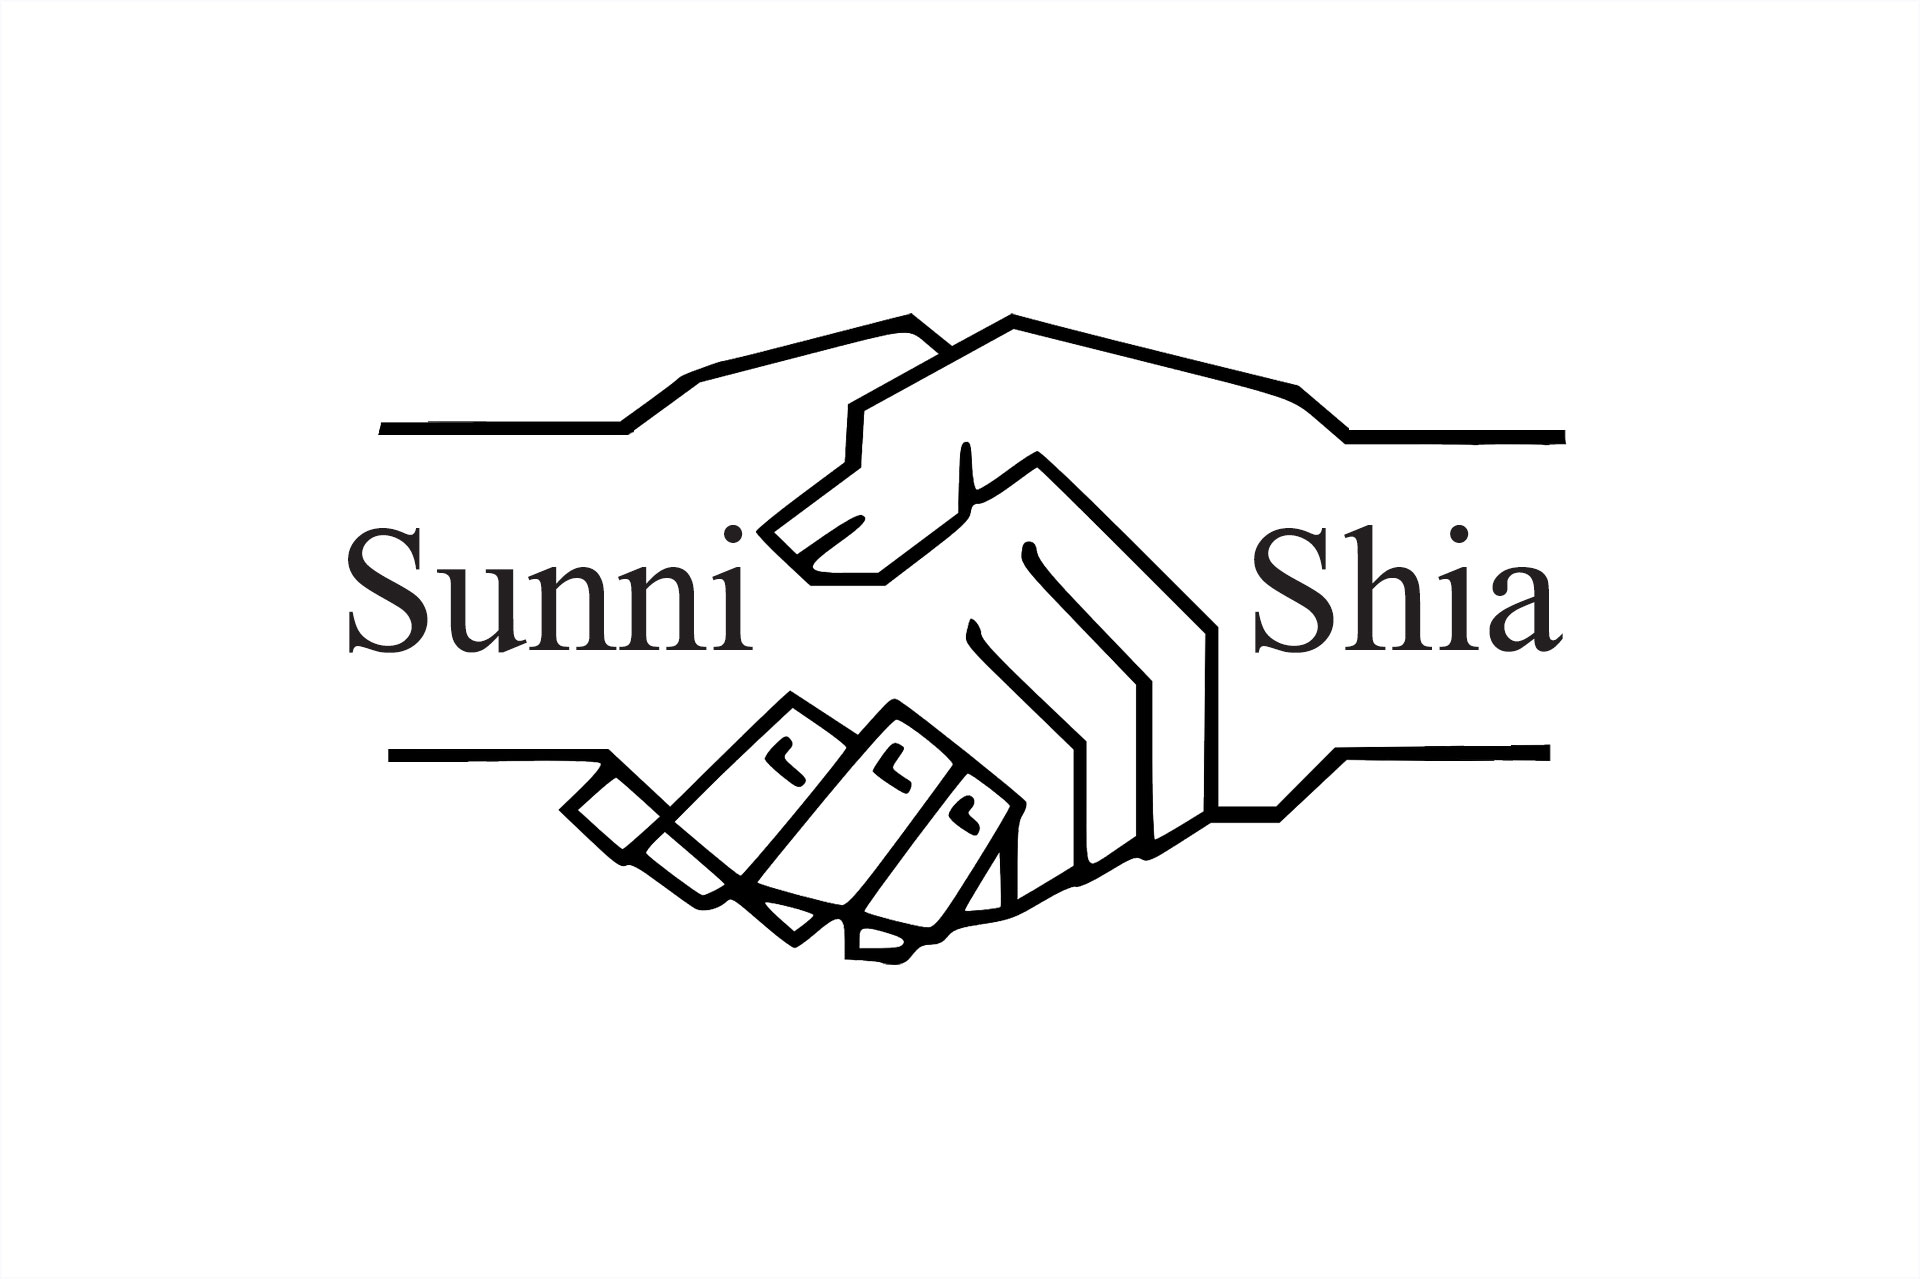 Bringing Religious Intolerance Down to Earth: The Case of the Sunni-Shia Schism